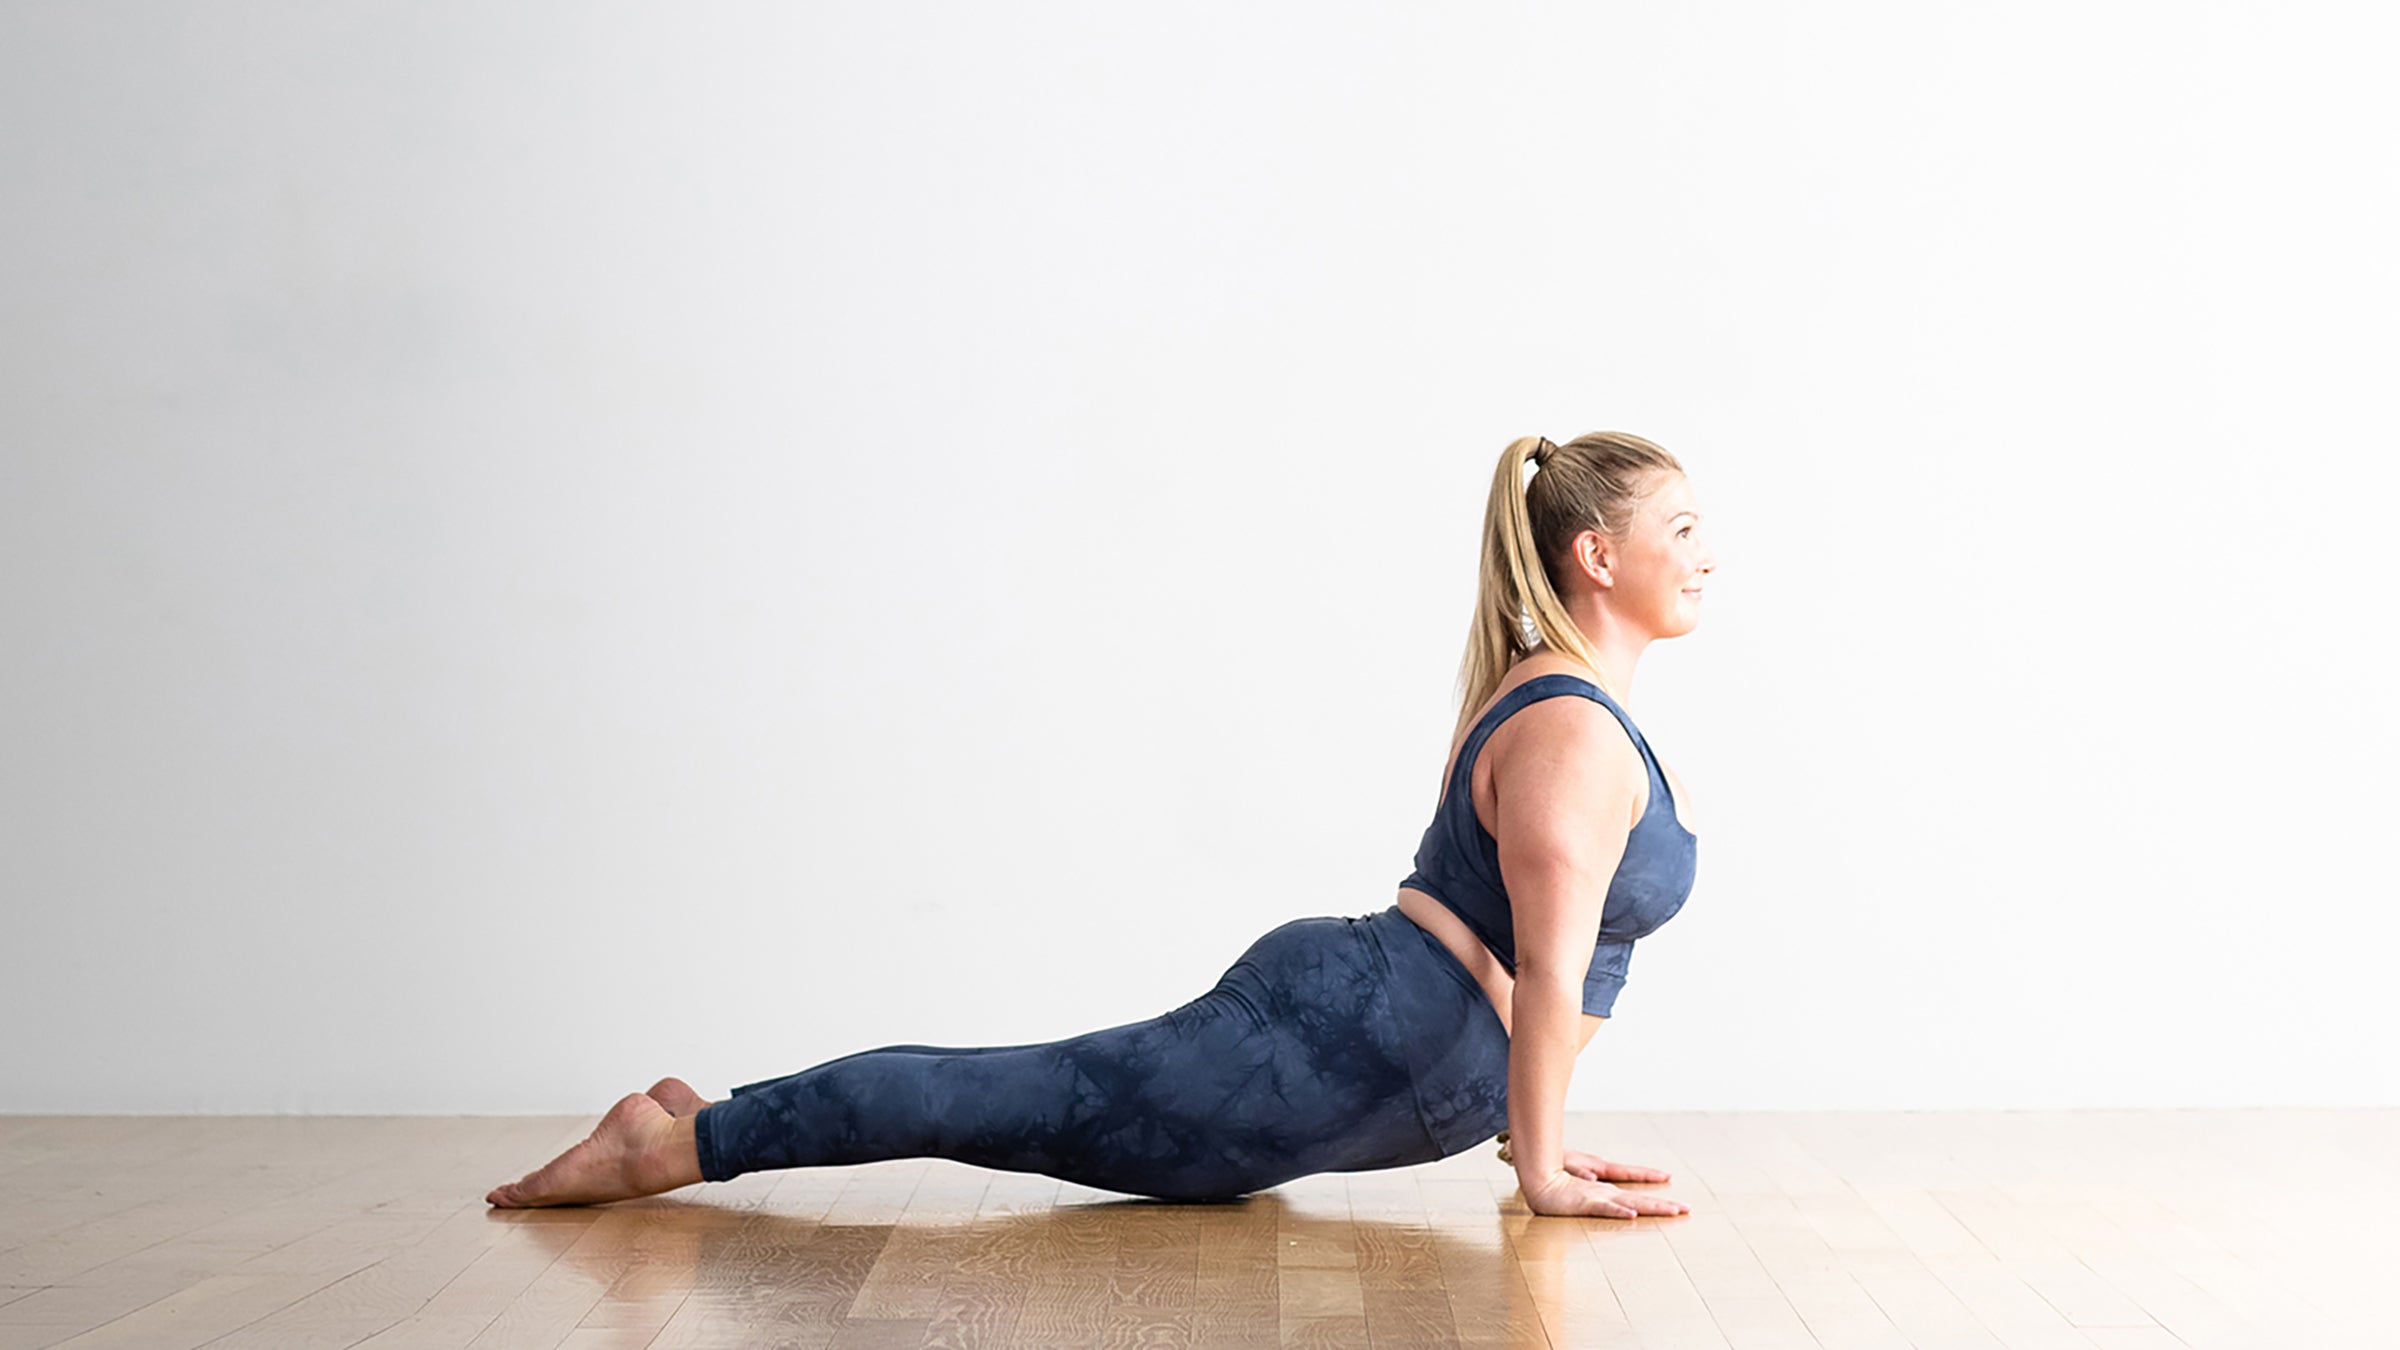 What's the science behind this pose? Remember seeing it's the only position  where both hips are completely free of supporting weight at once or  something. : r/yoga